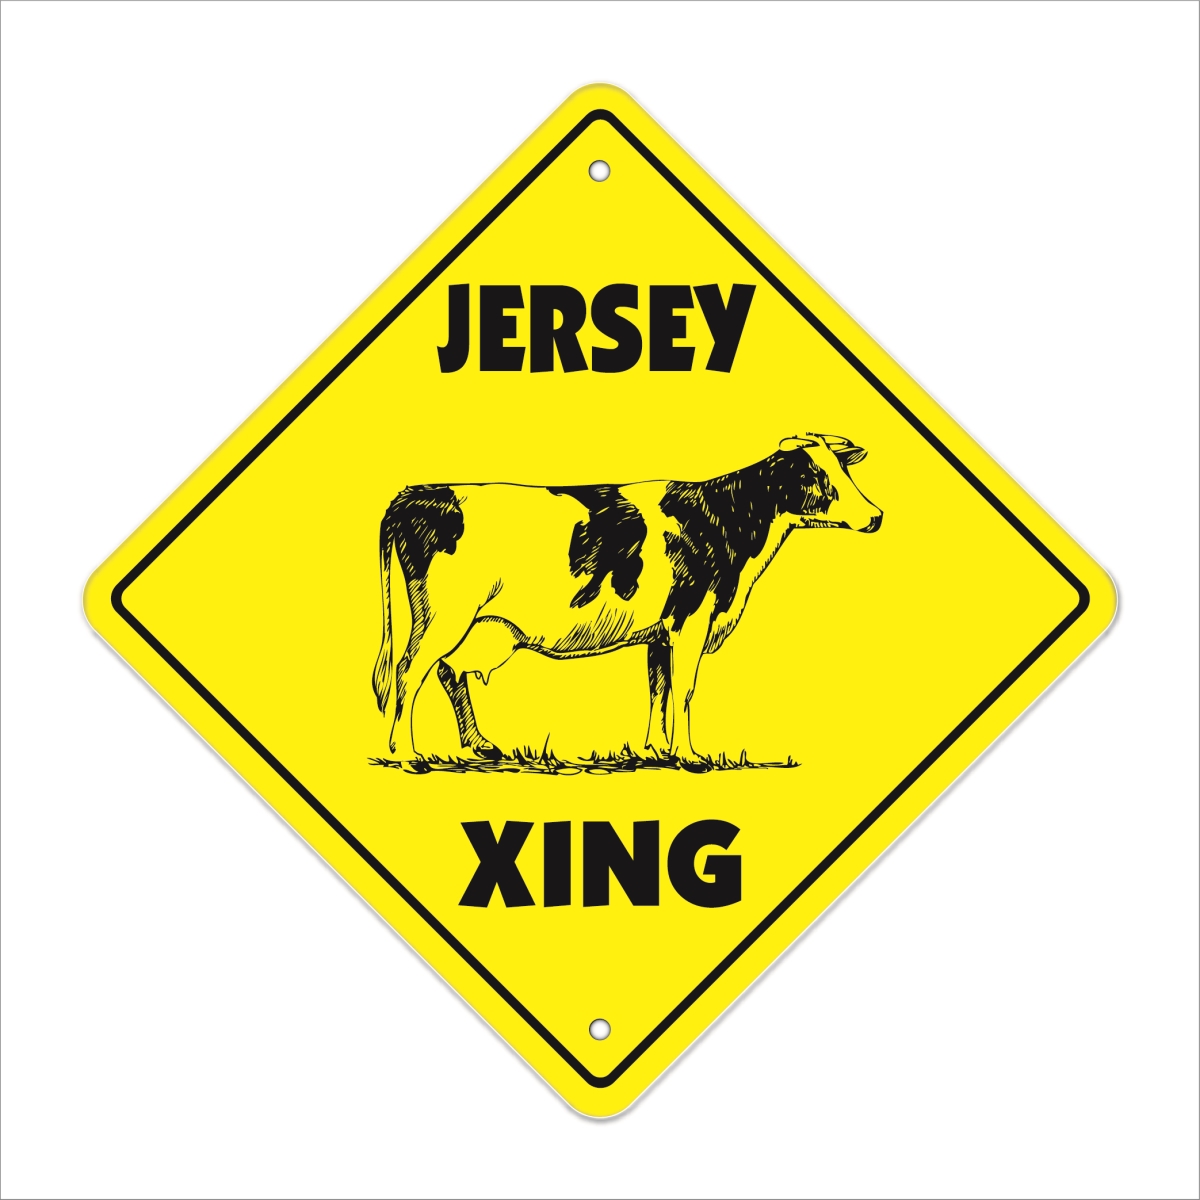 SignMission X-JERSEY XING 12 x 12 in. Zone Xing Crossing Sign - Jersey Xing